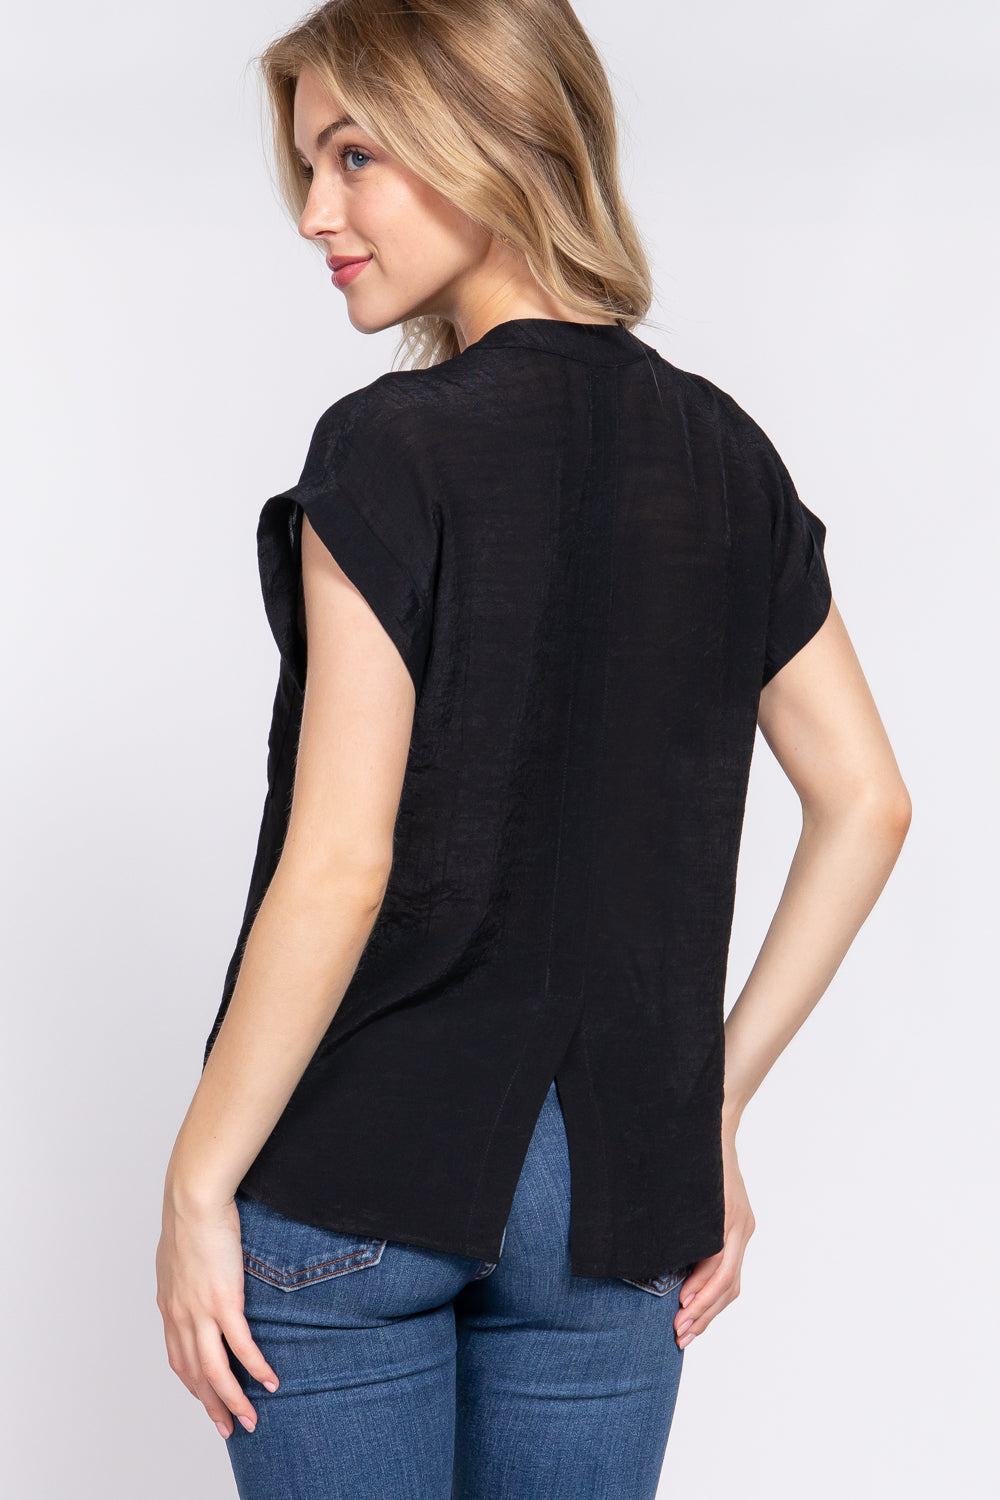 Women's black dolman sleeve woven top with open neck, front pocket, button down front and back slit. rear view